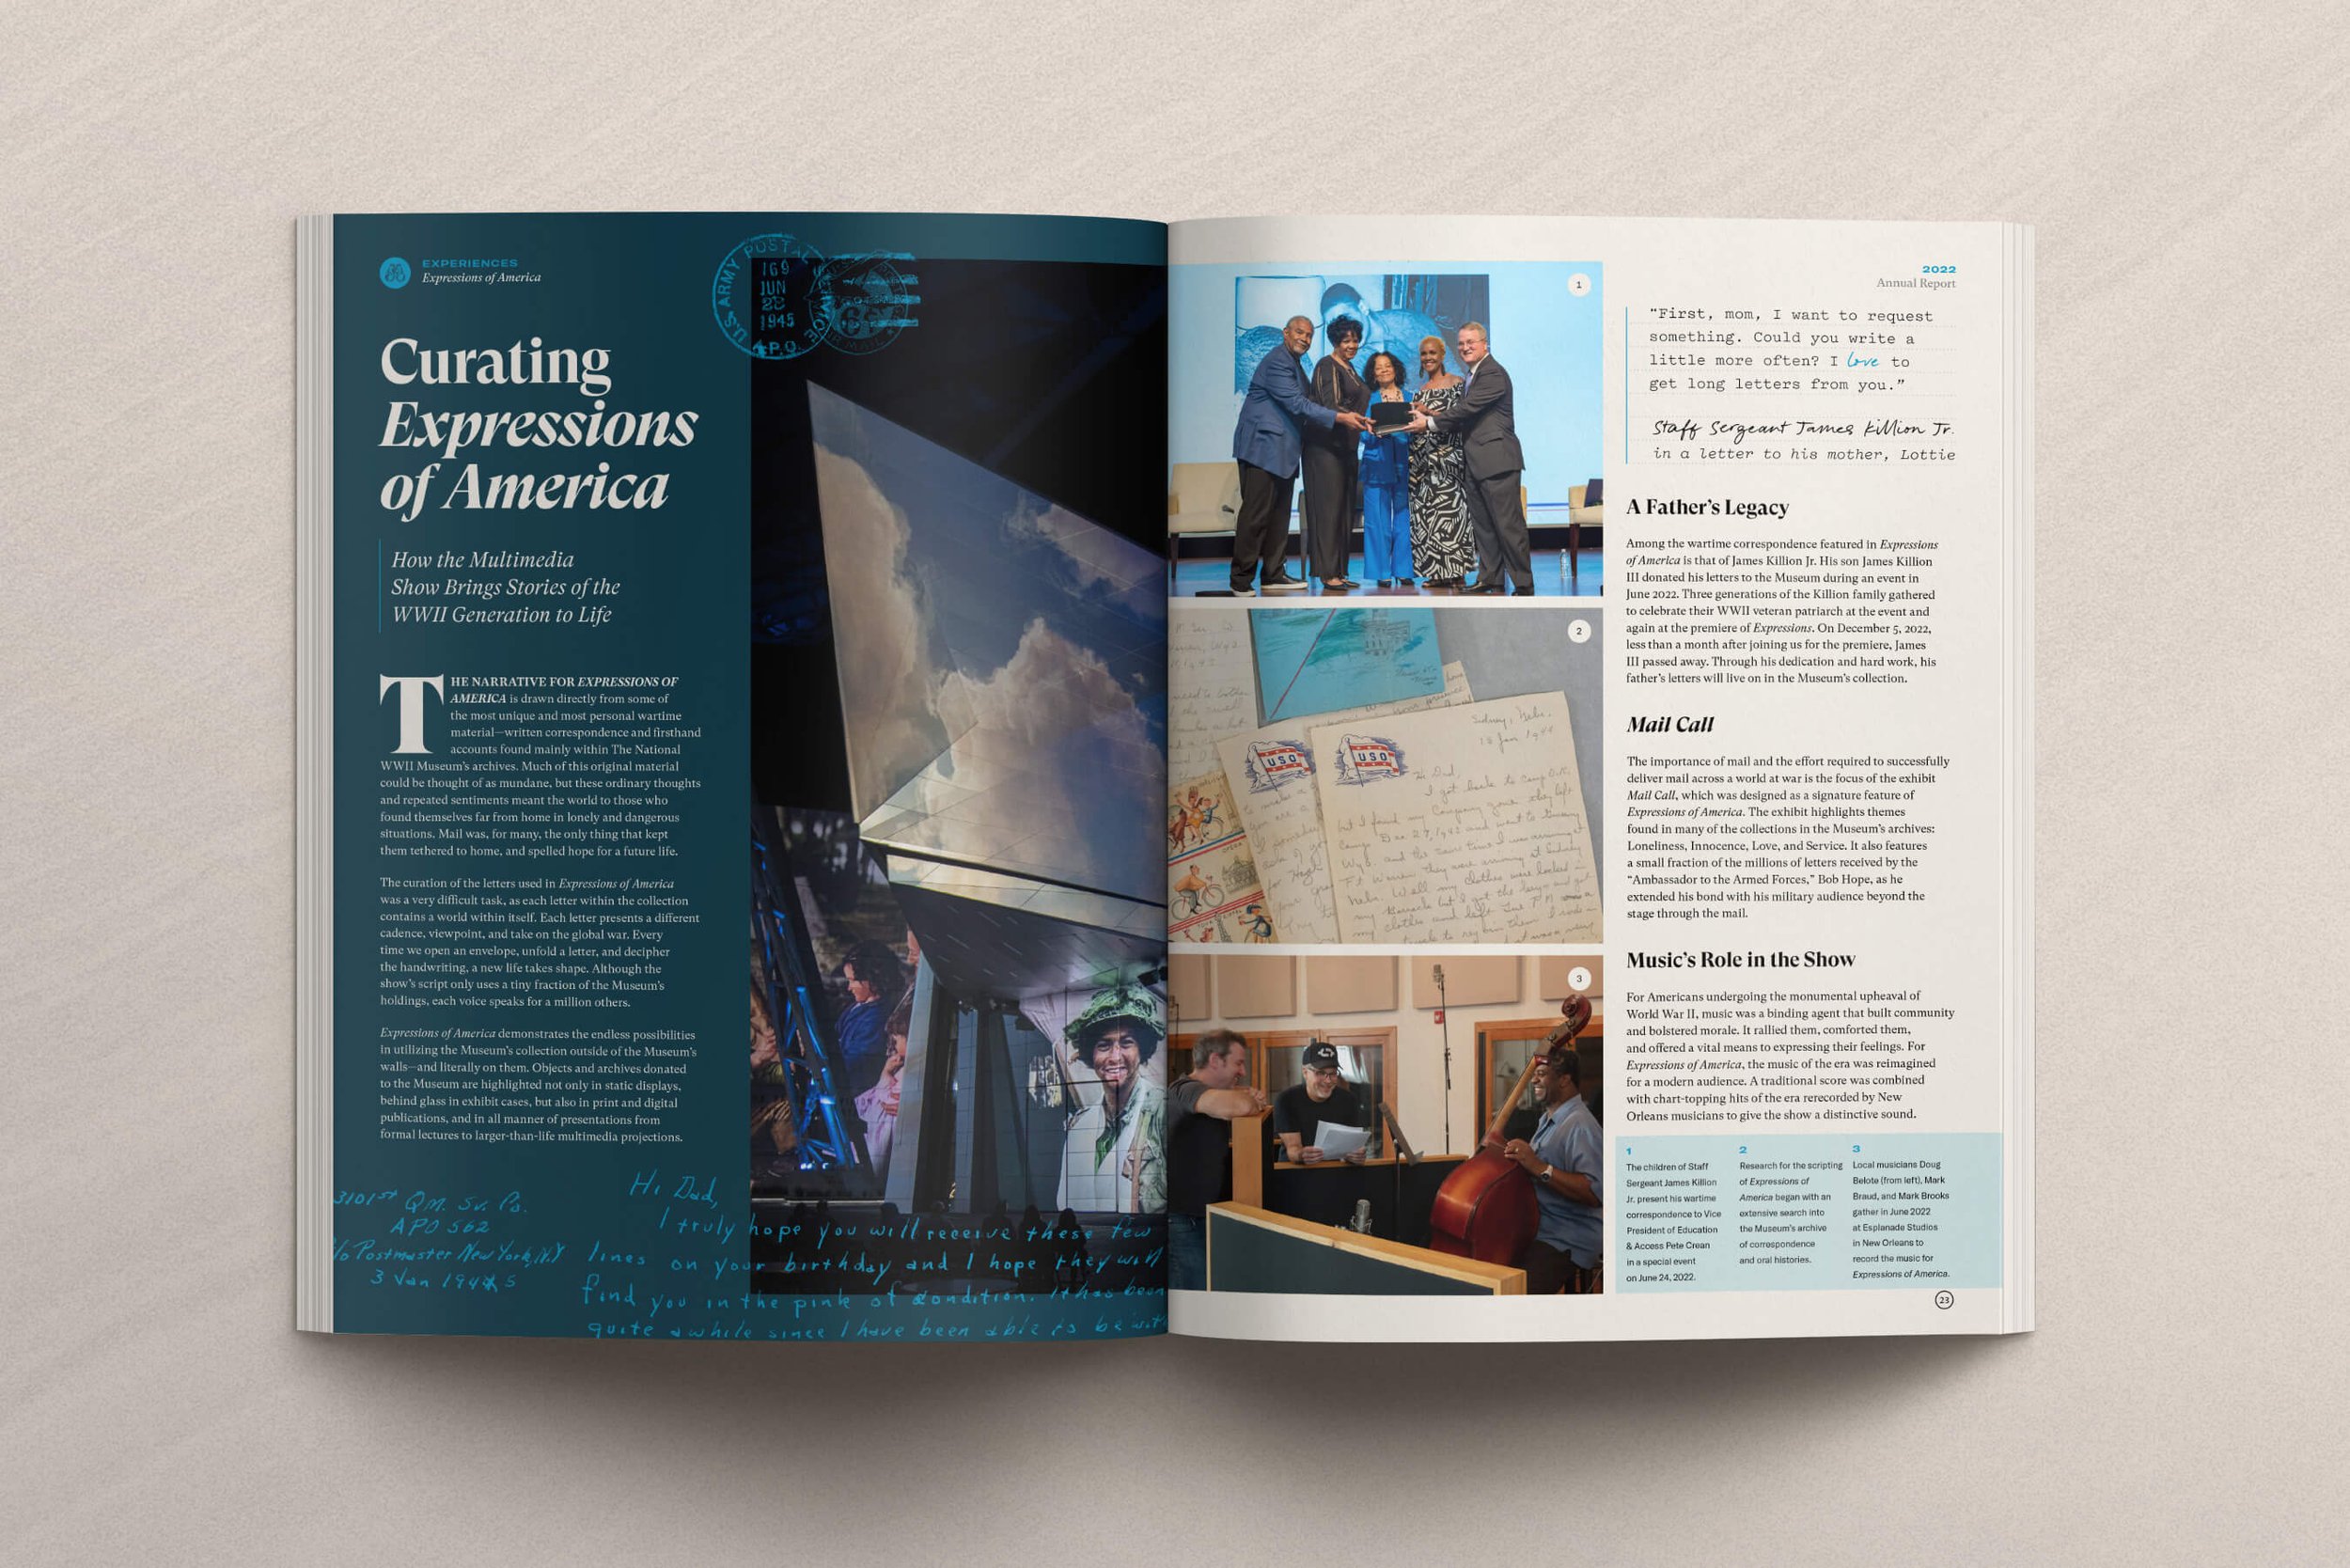  Open book featuring an article titled "curating expressions of america" with images of artifacts, a group of people smiling, and archival documents. 